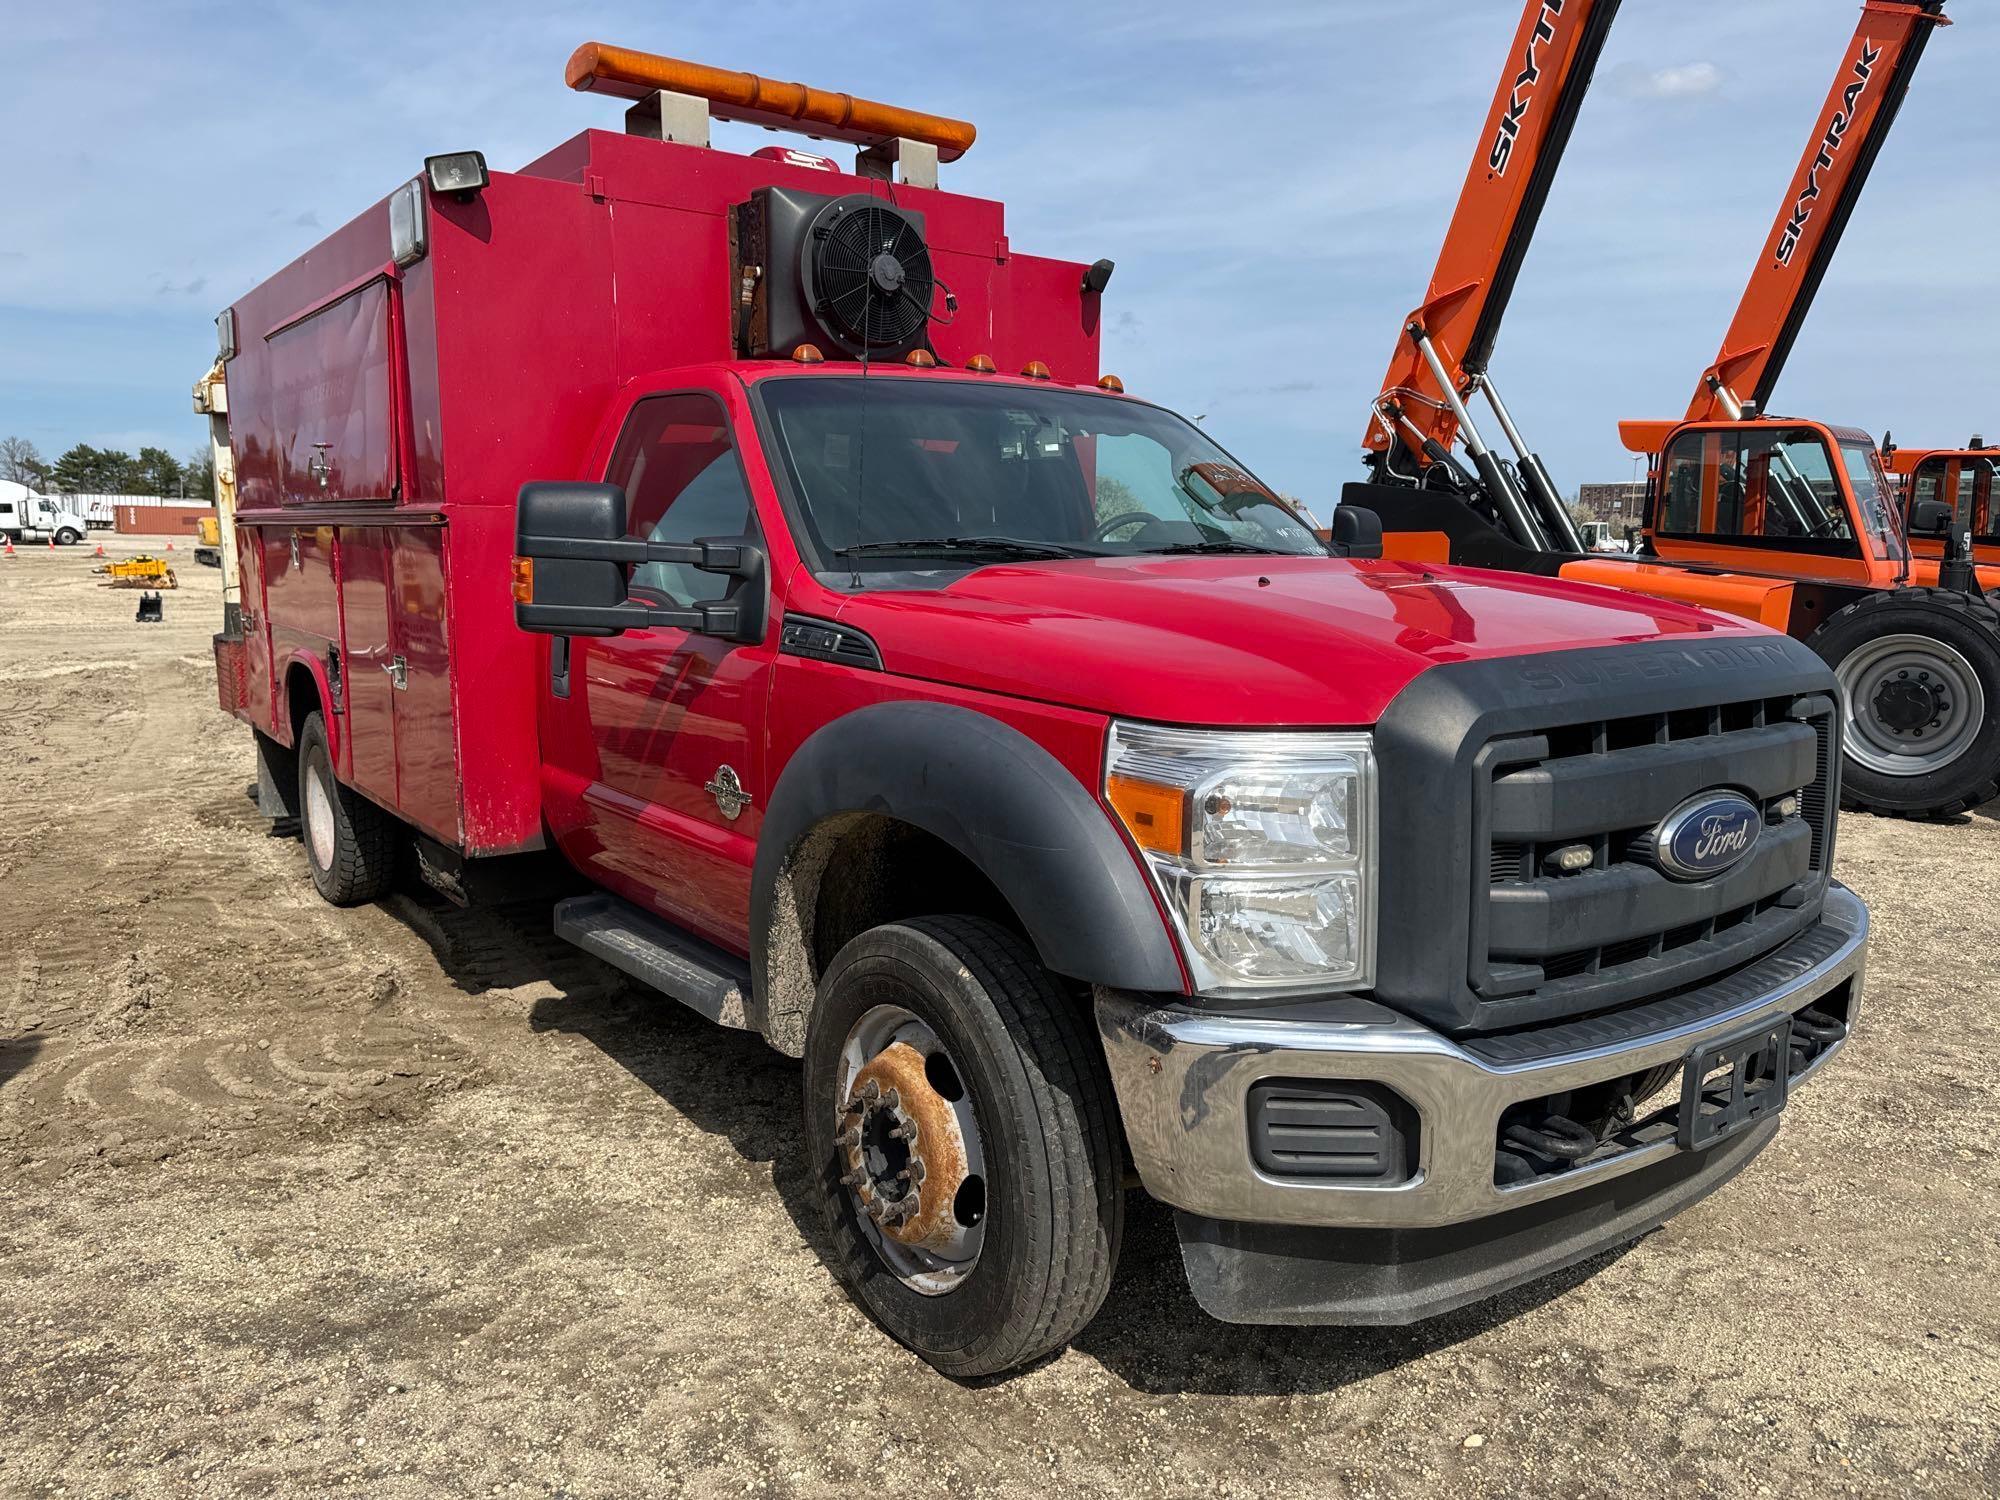 2015 FORD F550 SERVICE TRUCK VN:1FDUF5GT3FEC73101 powered by gas engine, equipped with power